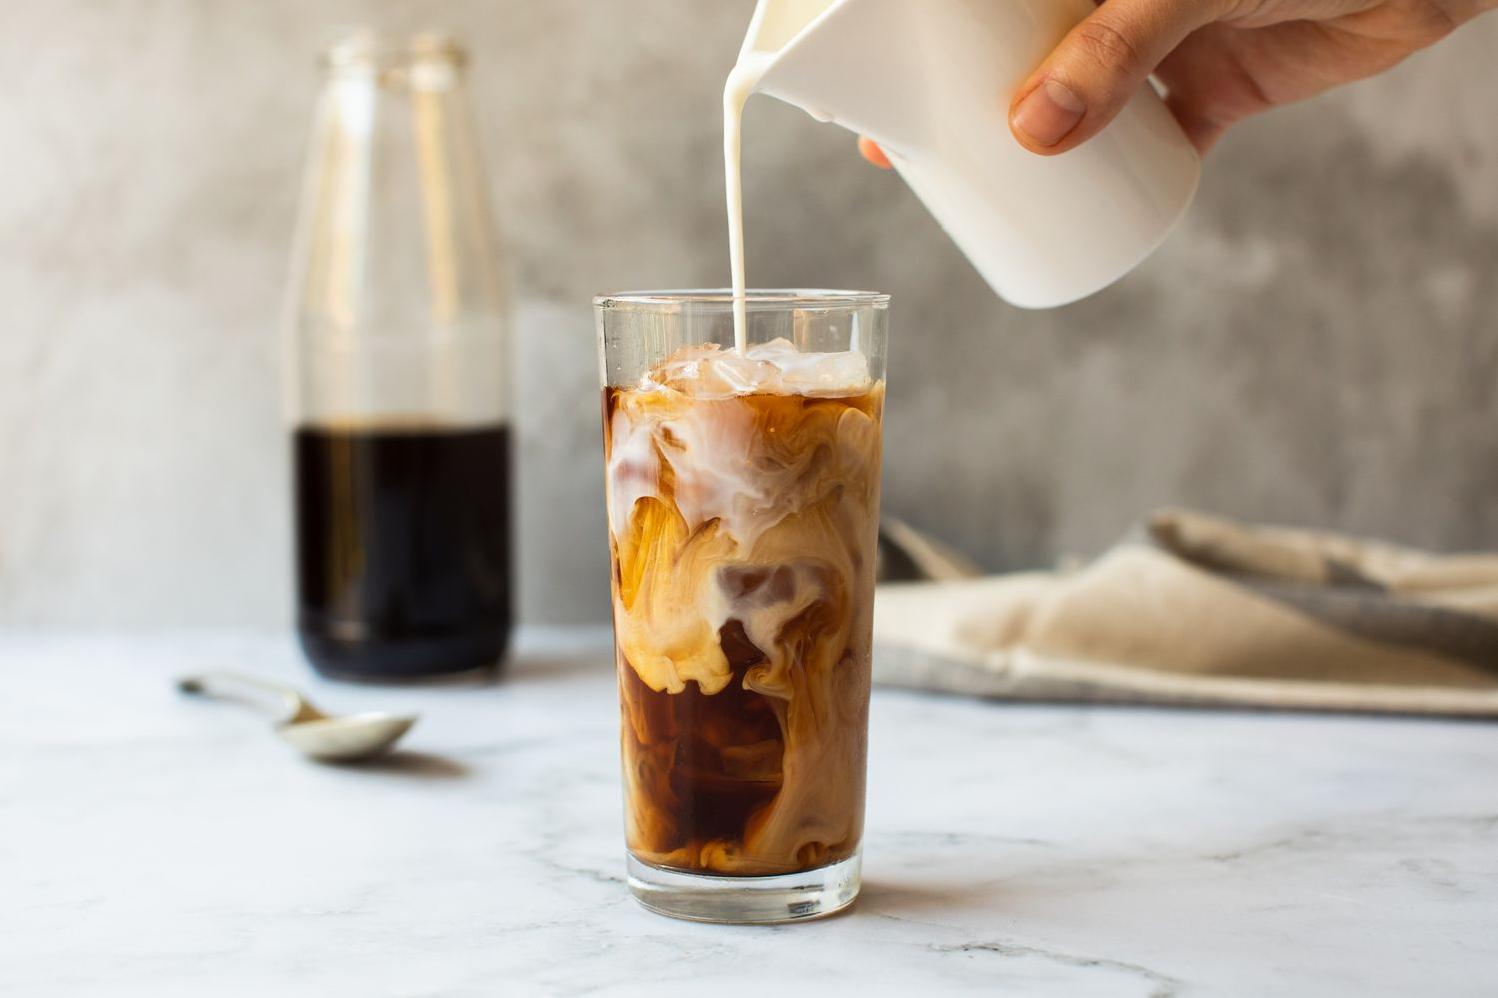  Who needs a hot cup of joe when you can enjoy the chill vibes of cold brew?